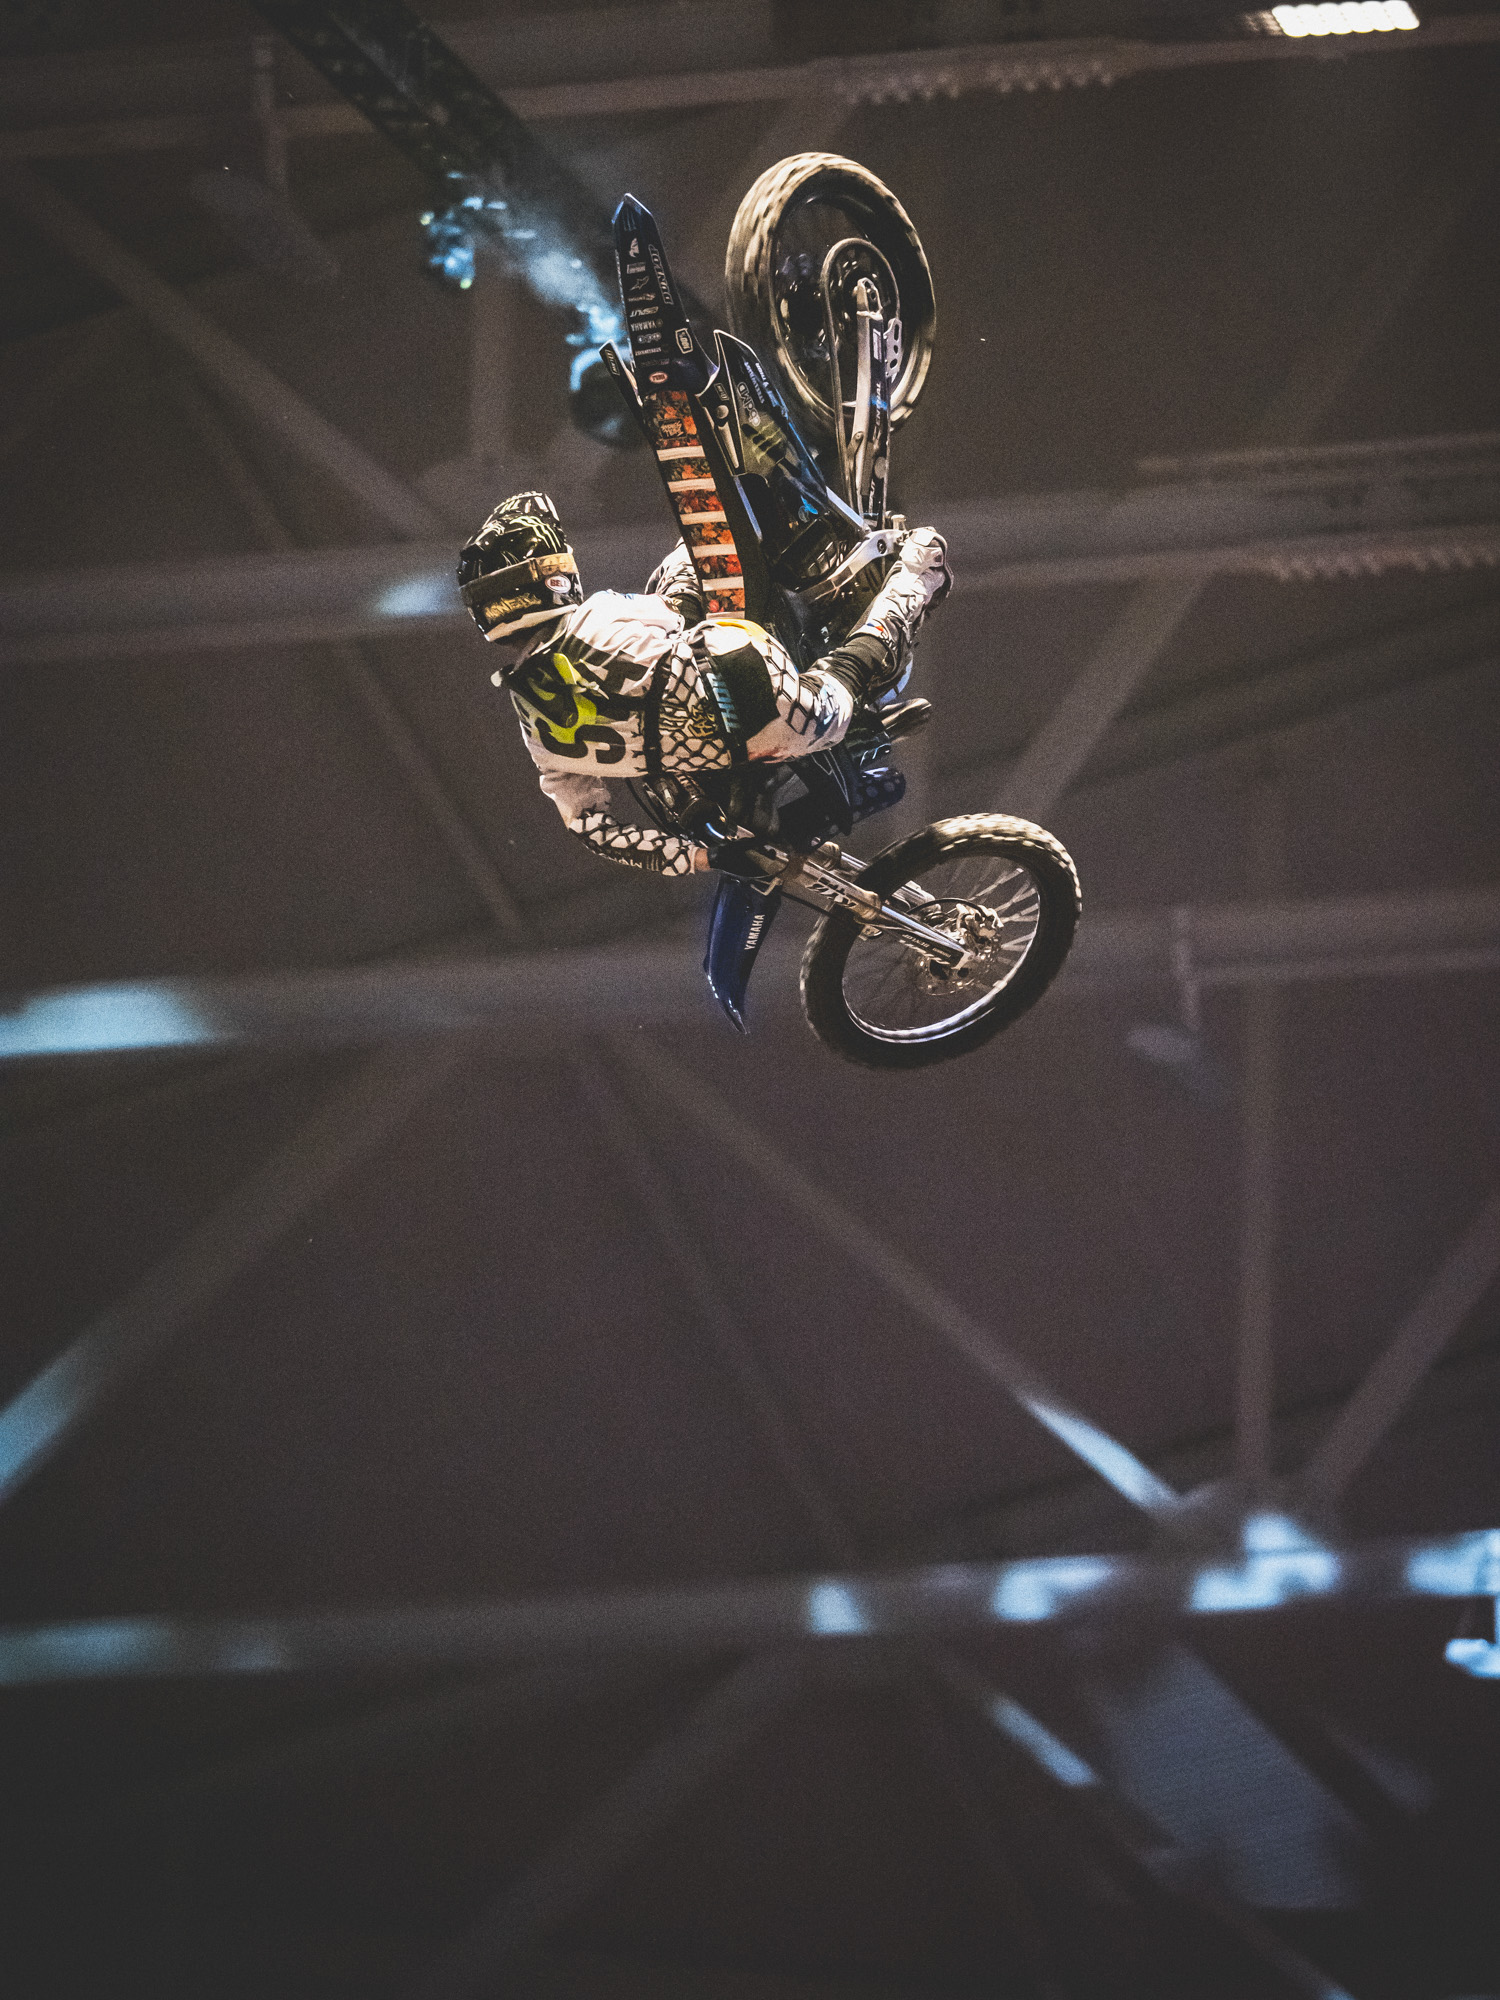 Monster Energy's Jarryd McNeil Takes Gold in Moto X Best Whip at X Games Norway 2019